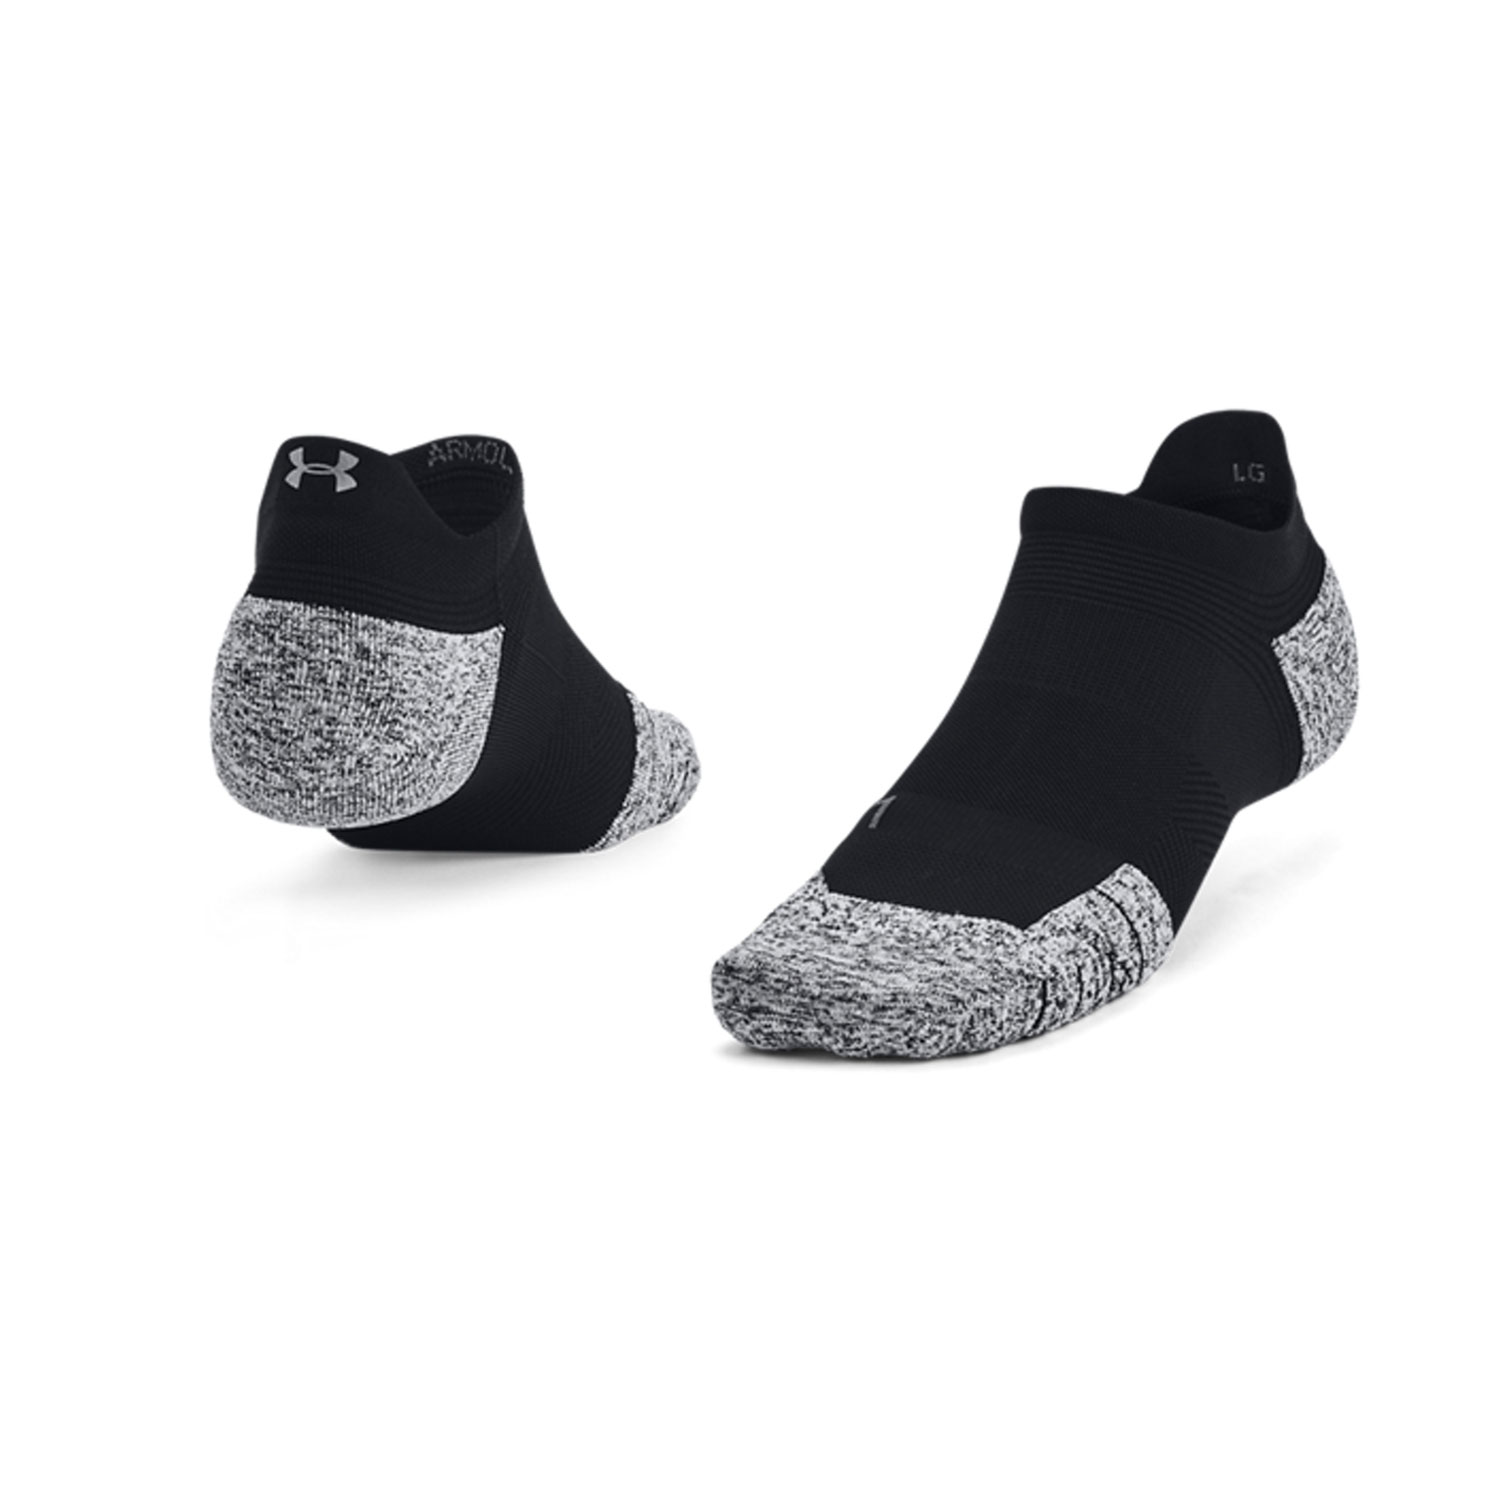 Under Armour ArmourDry Cushion Calcetines - Black/Pitch Gray/Reflective